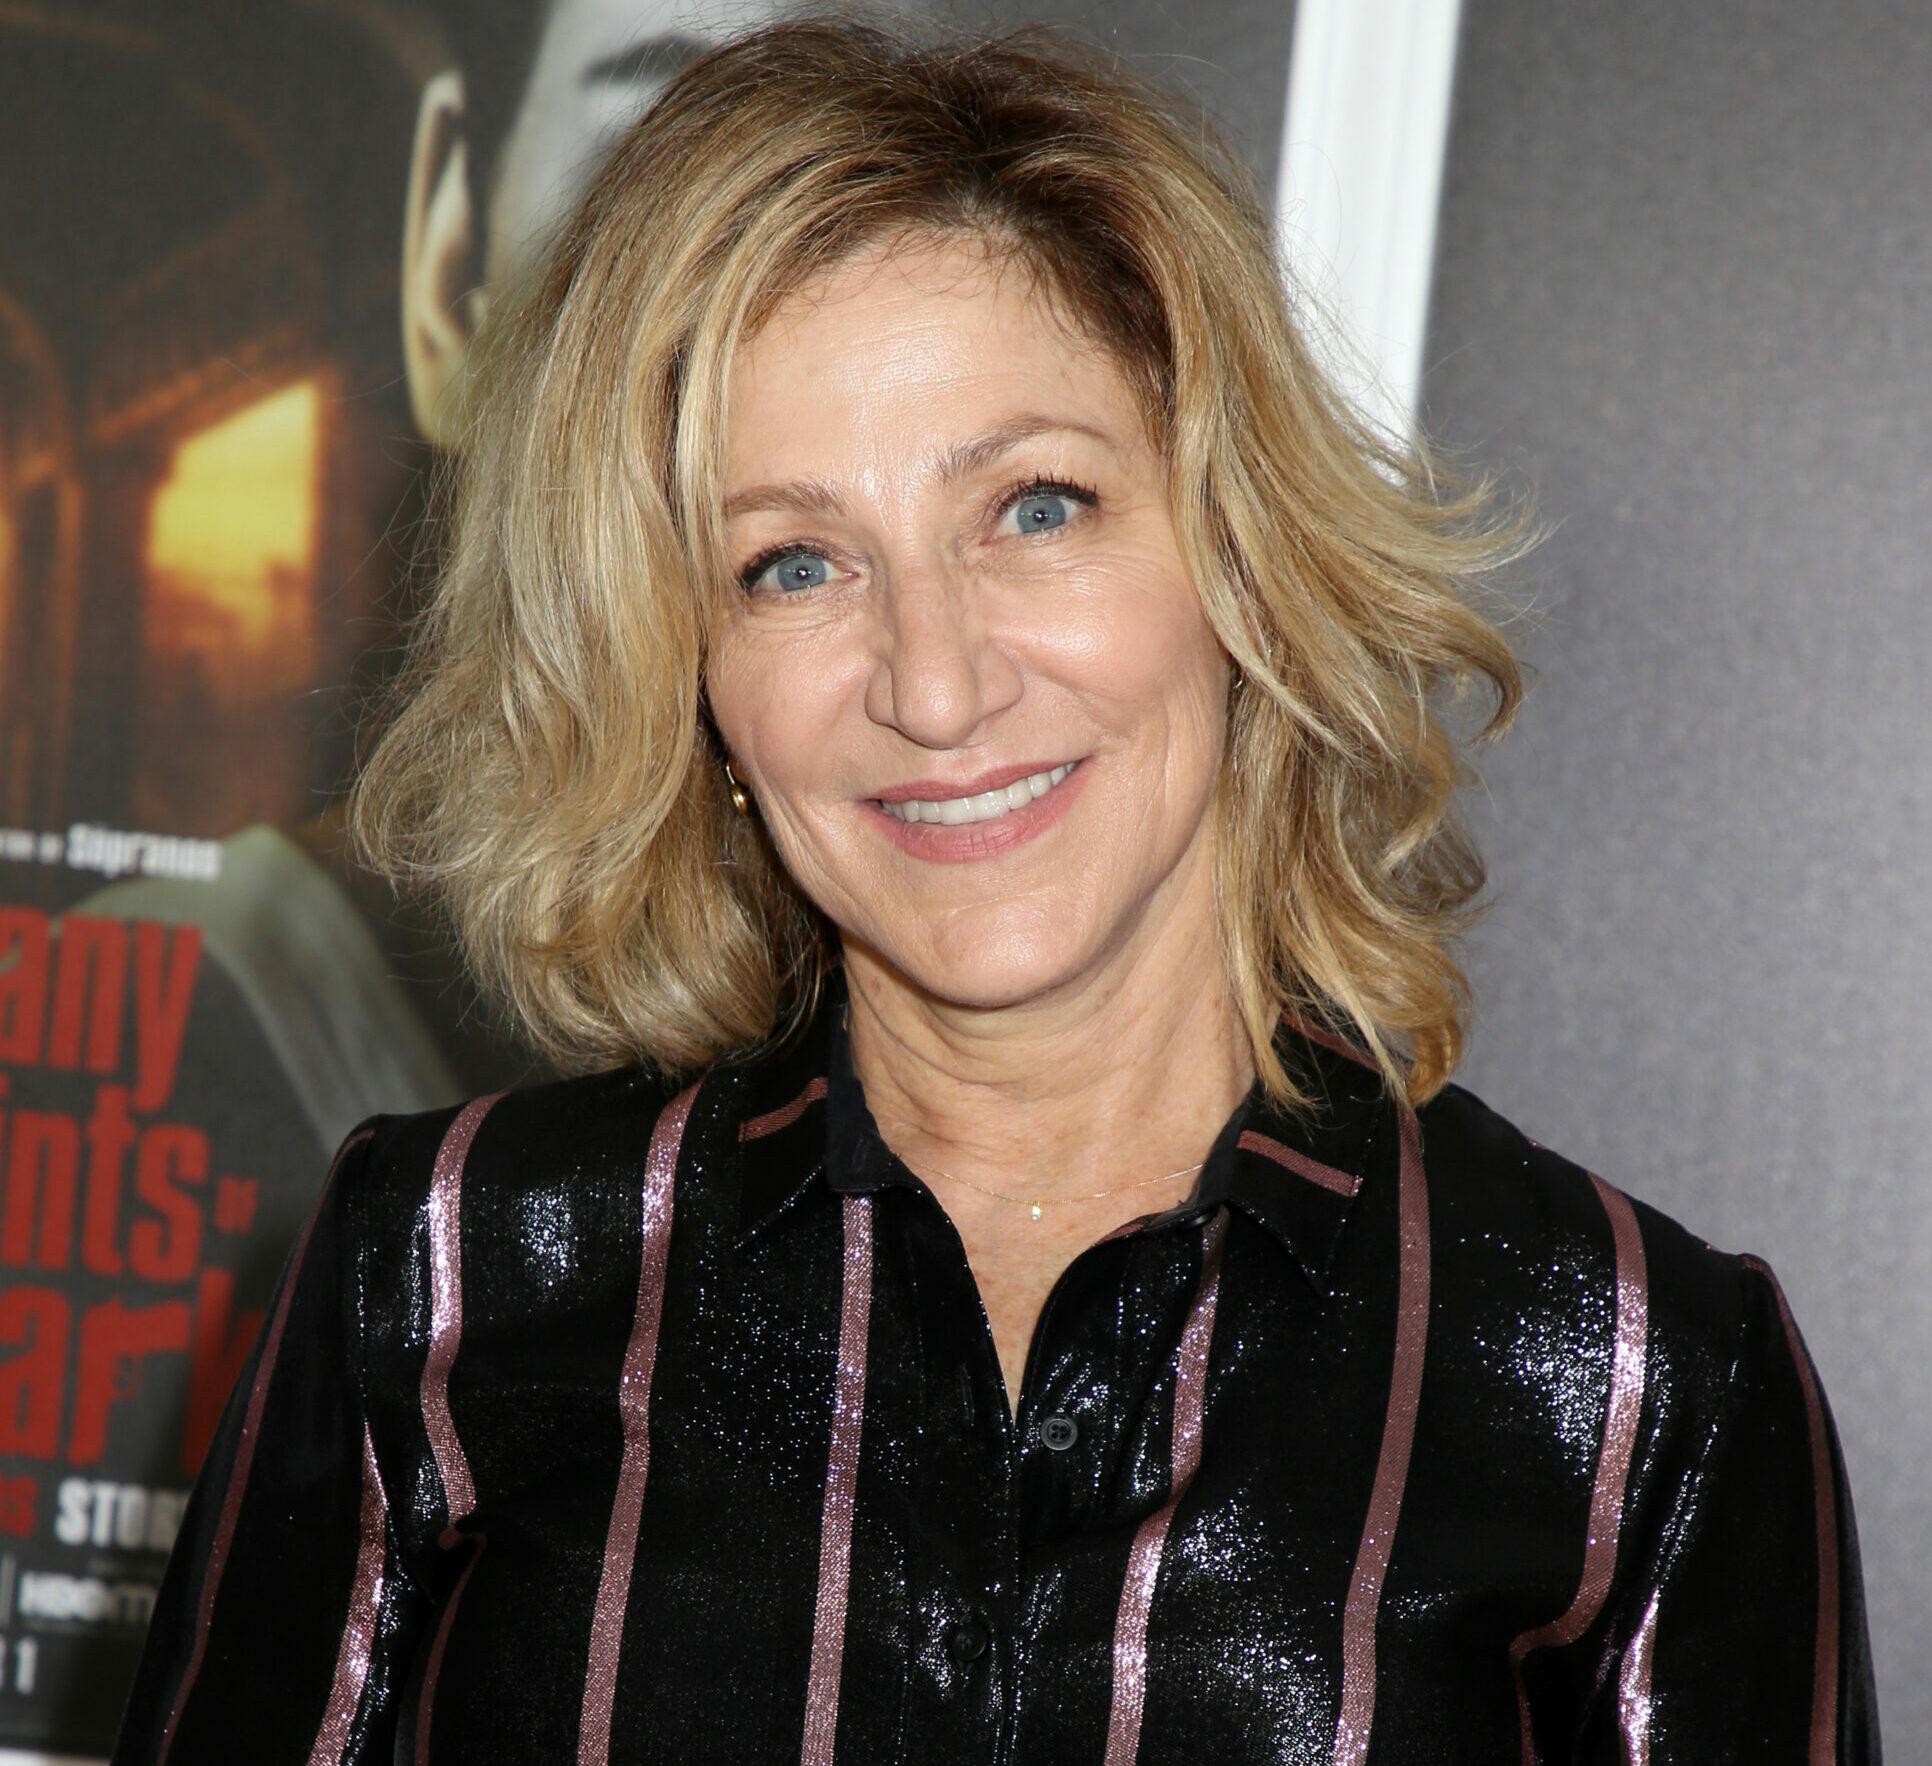 Vera Farmiga attending 'The Many Saints of Newark' Premiere held at the Beacon Theater on September 22, 2021 in New York City, NY. 22 Sep 2021 Pictured: Edie Falco.